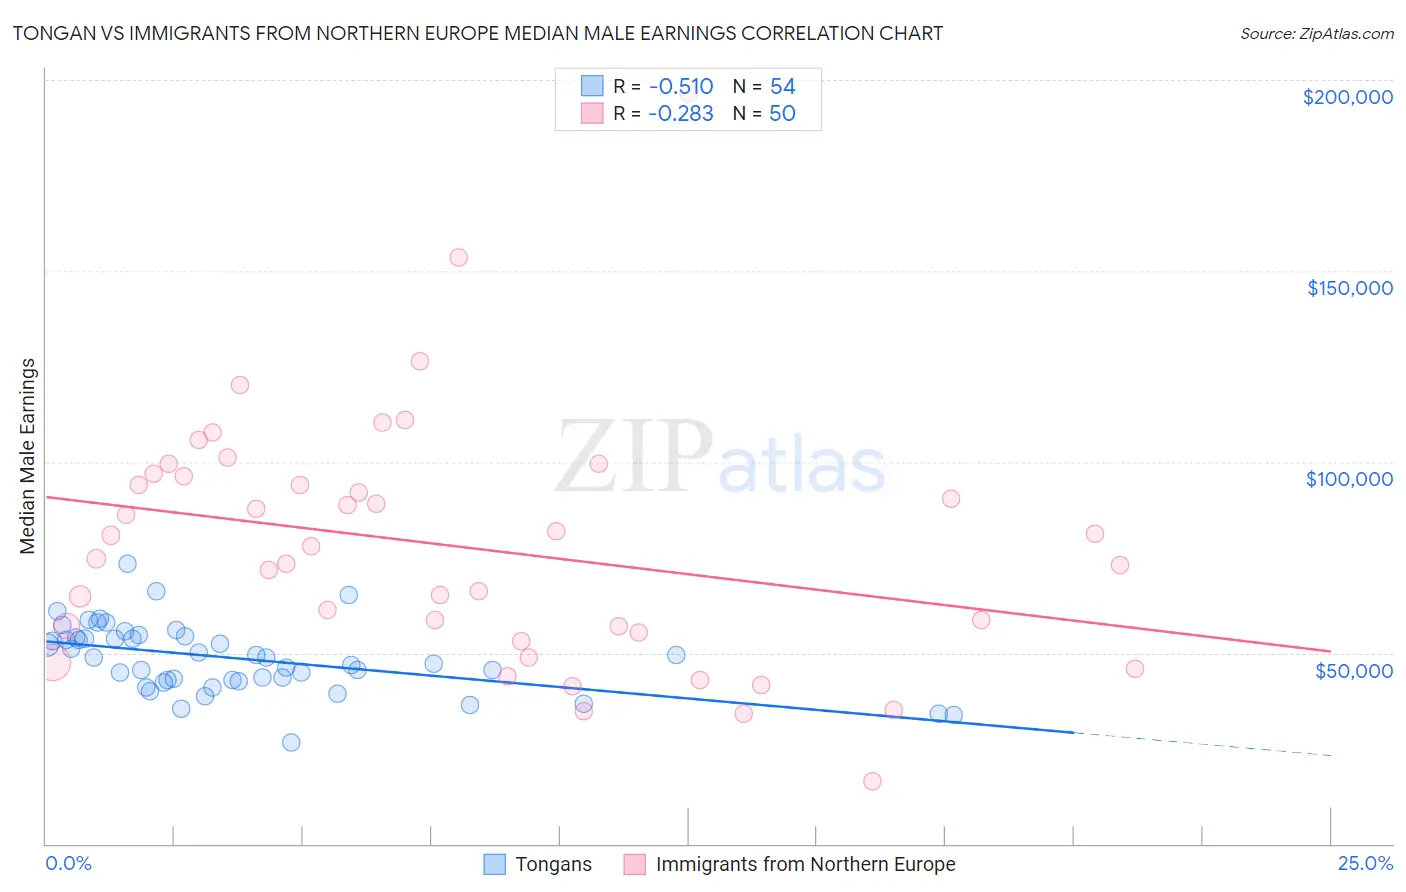 Tongan vs Immigrants from Northern Europe Median Male Earnings